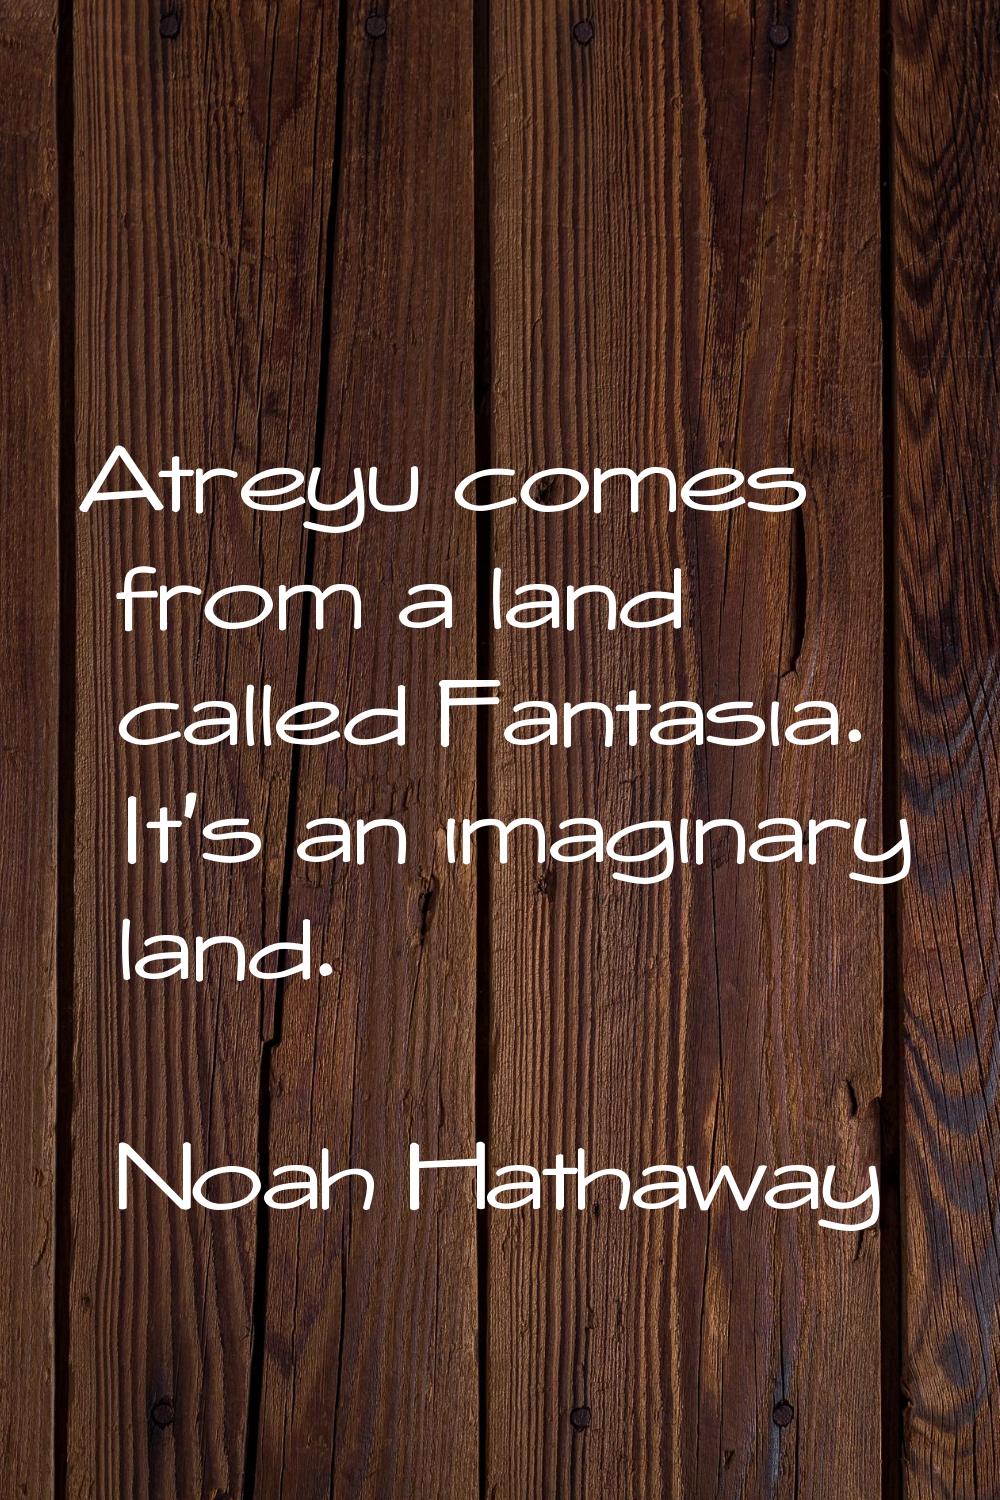 Atreyu comes from a land called Fantasia. It's an imaginary land.